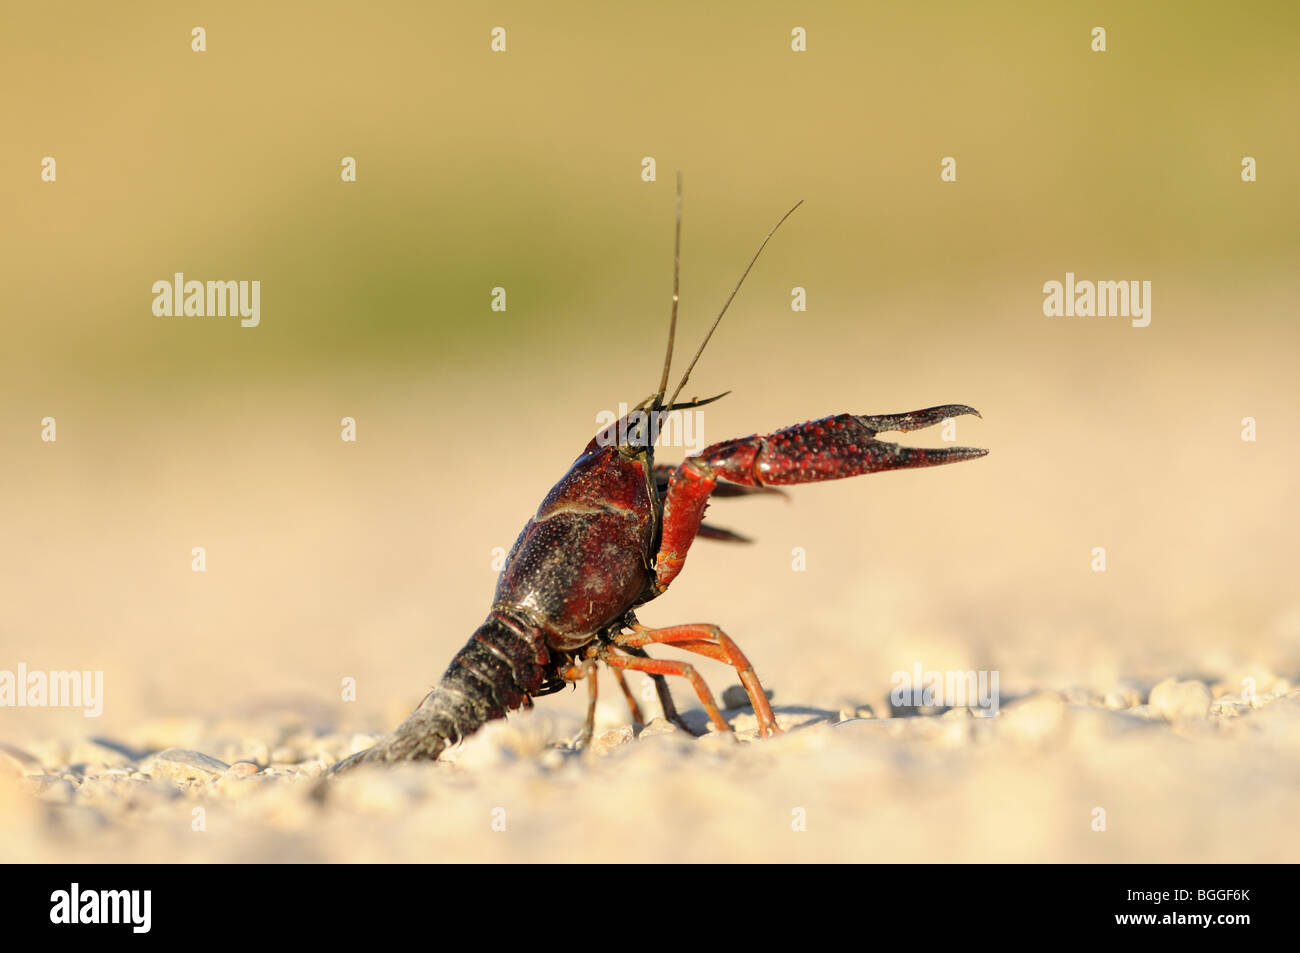 Galician crayfish (Astacus leptodactylus) on gravel bed, Catalonia, Spain, side view Stock Photo